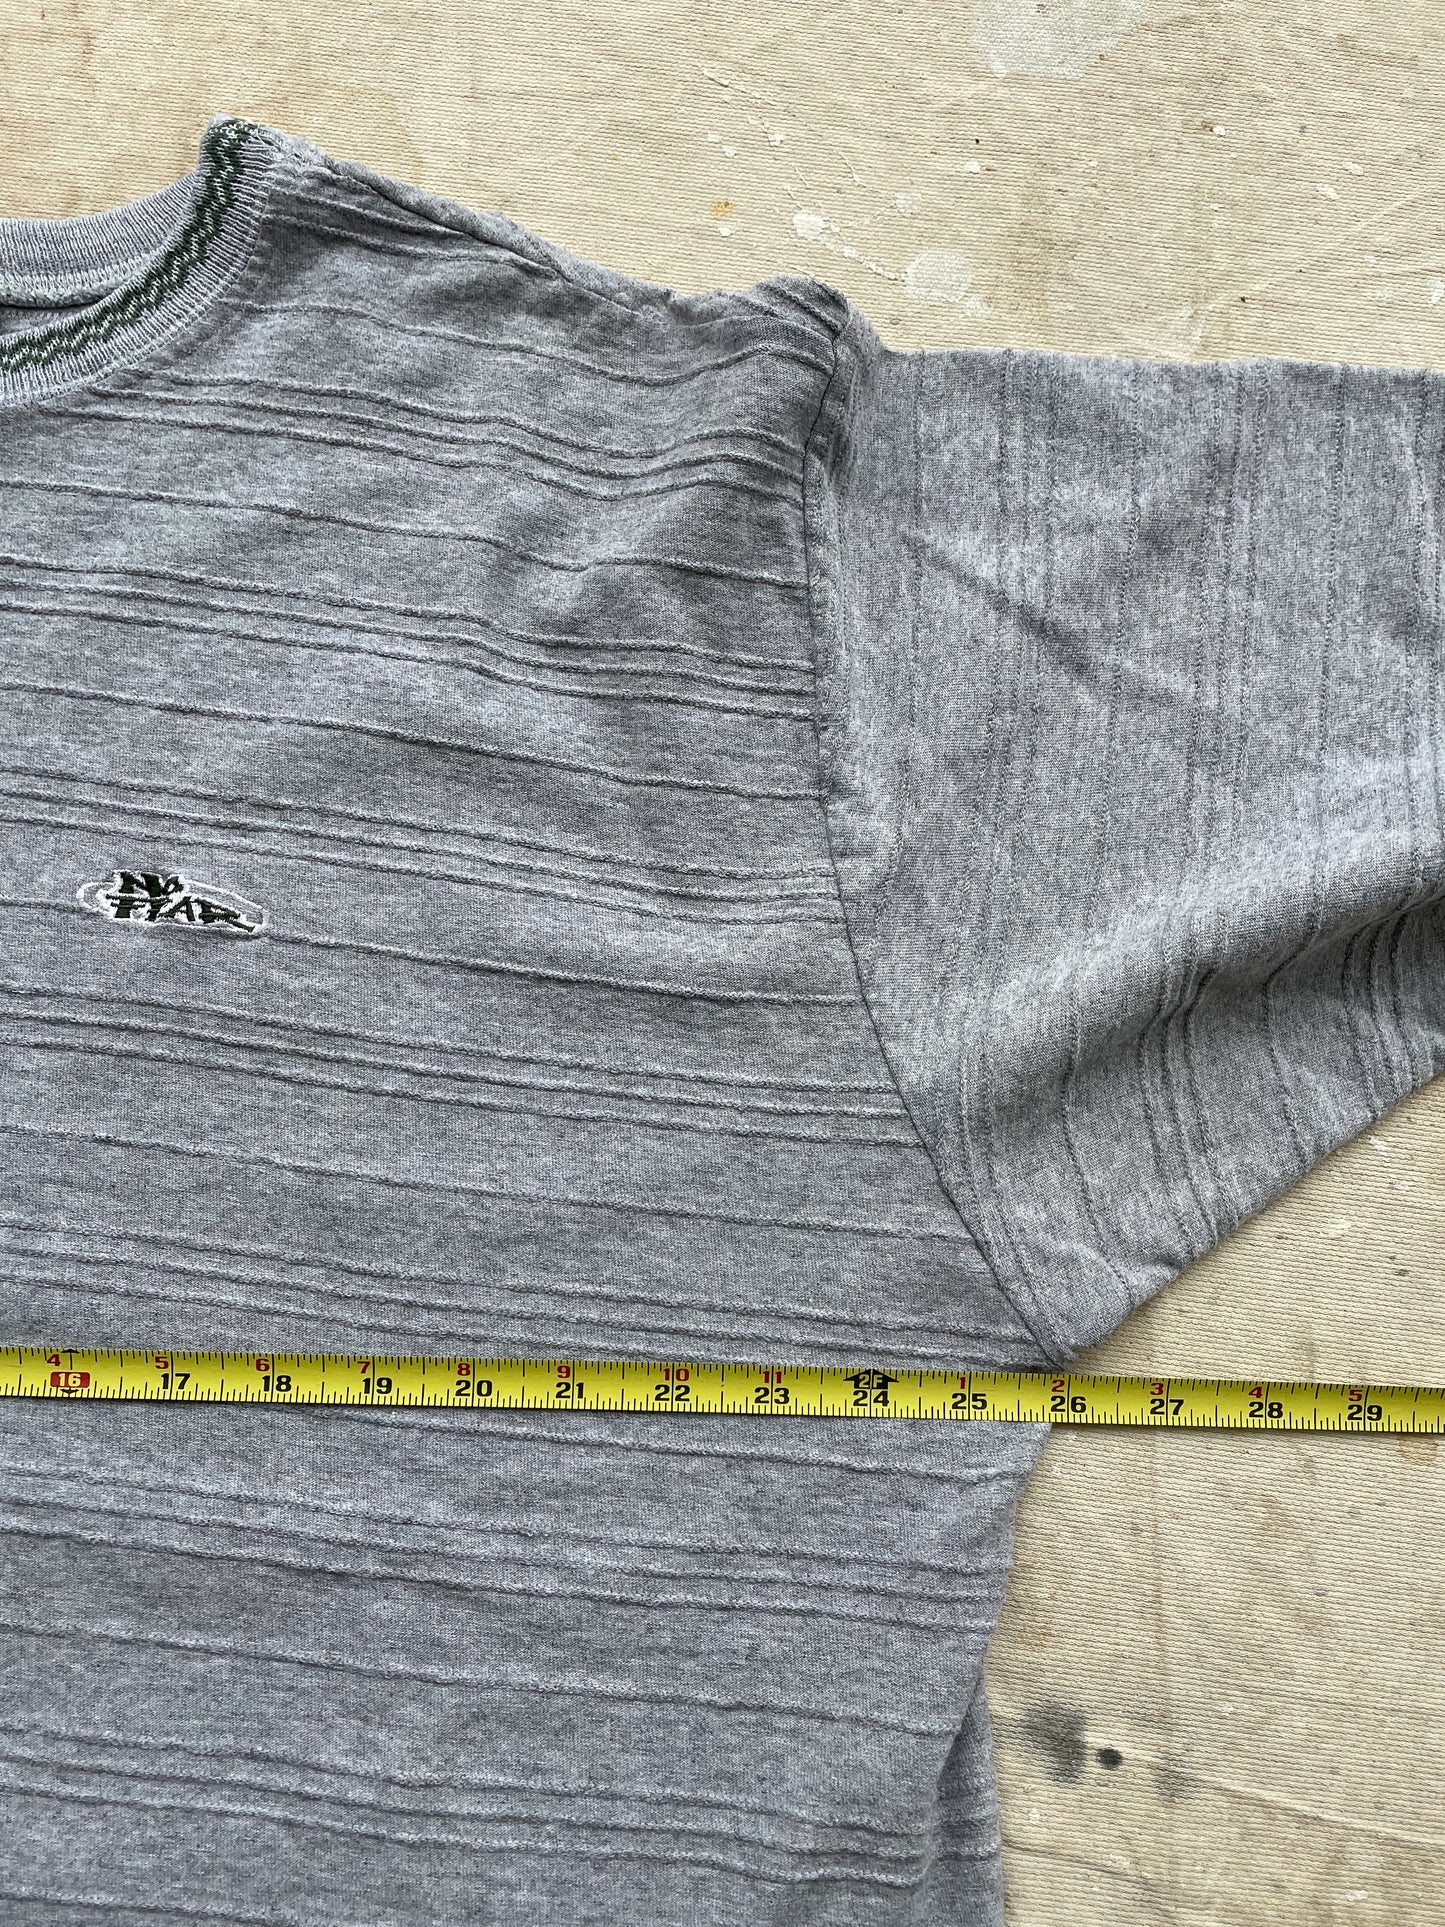 NO FEAR EMBROIDERED STRIPED T-SHIRT—MARL GREY [XL]